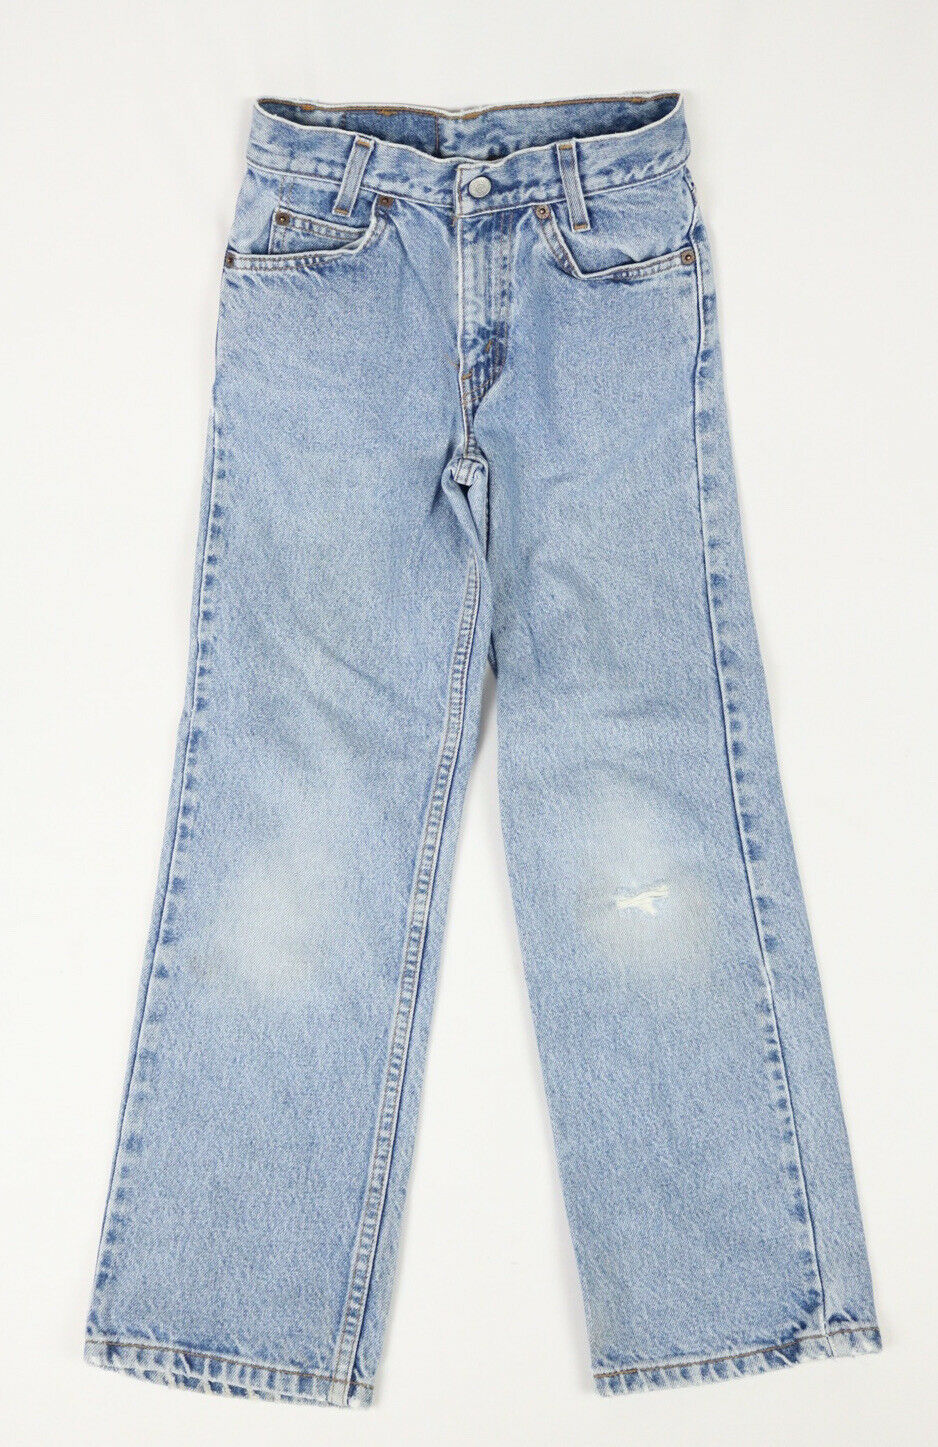 Vintage Youth Boys Levis 550 Distressed Relaxed Fit Slim Blue Jeans Fits 23x26